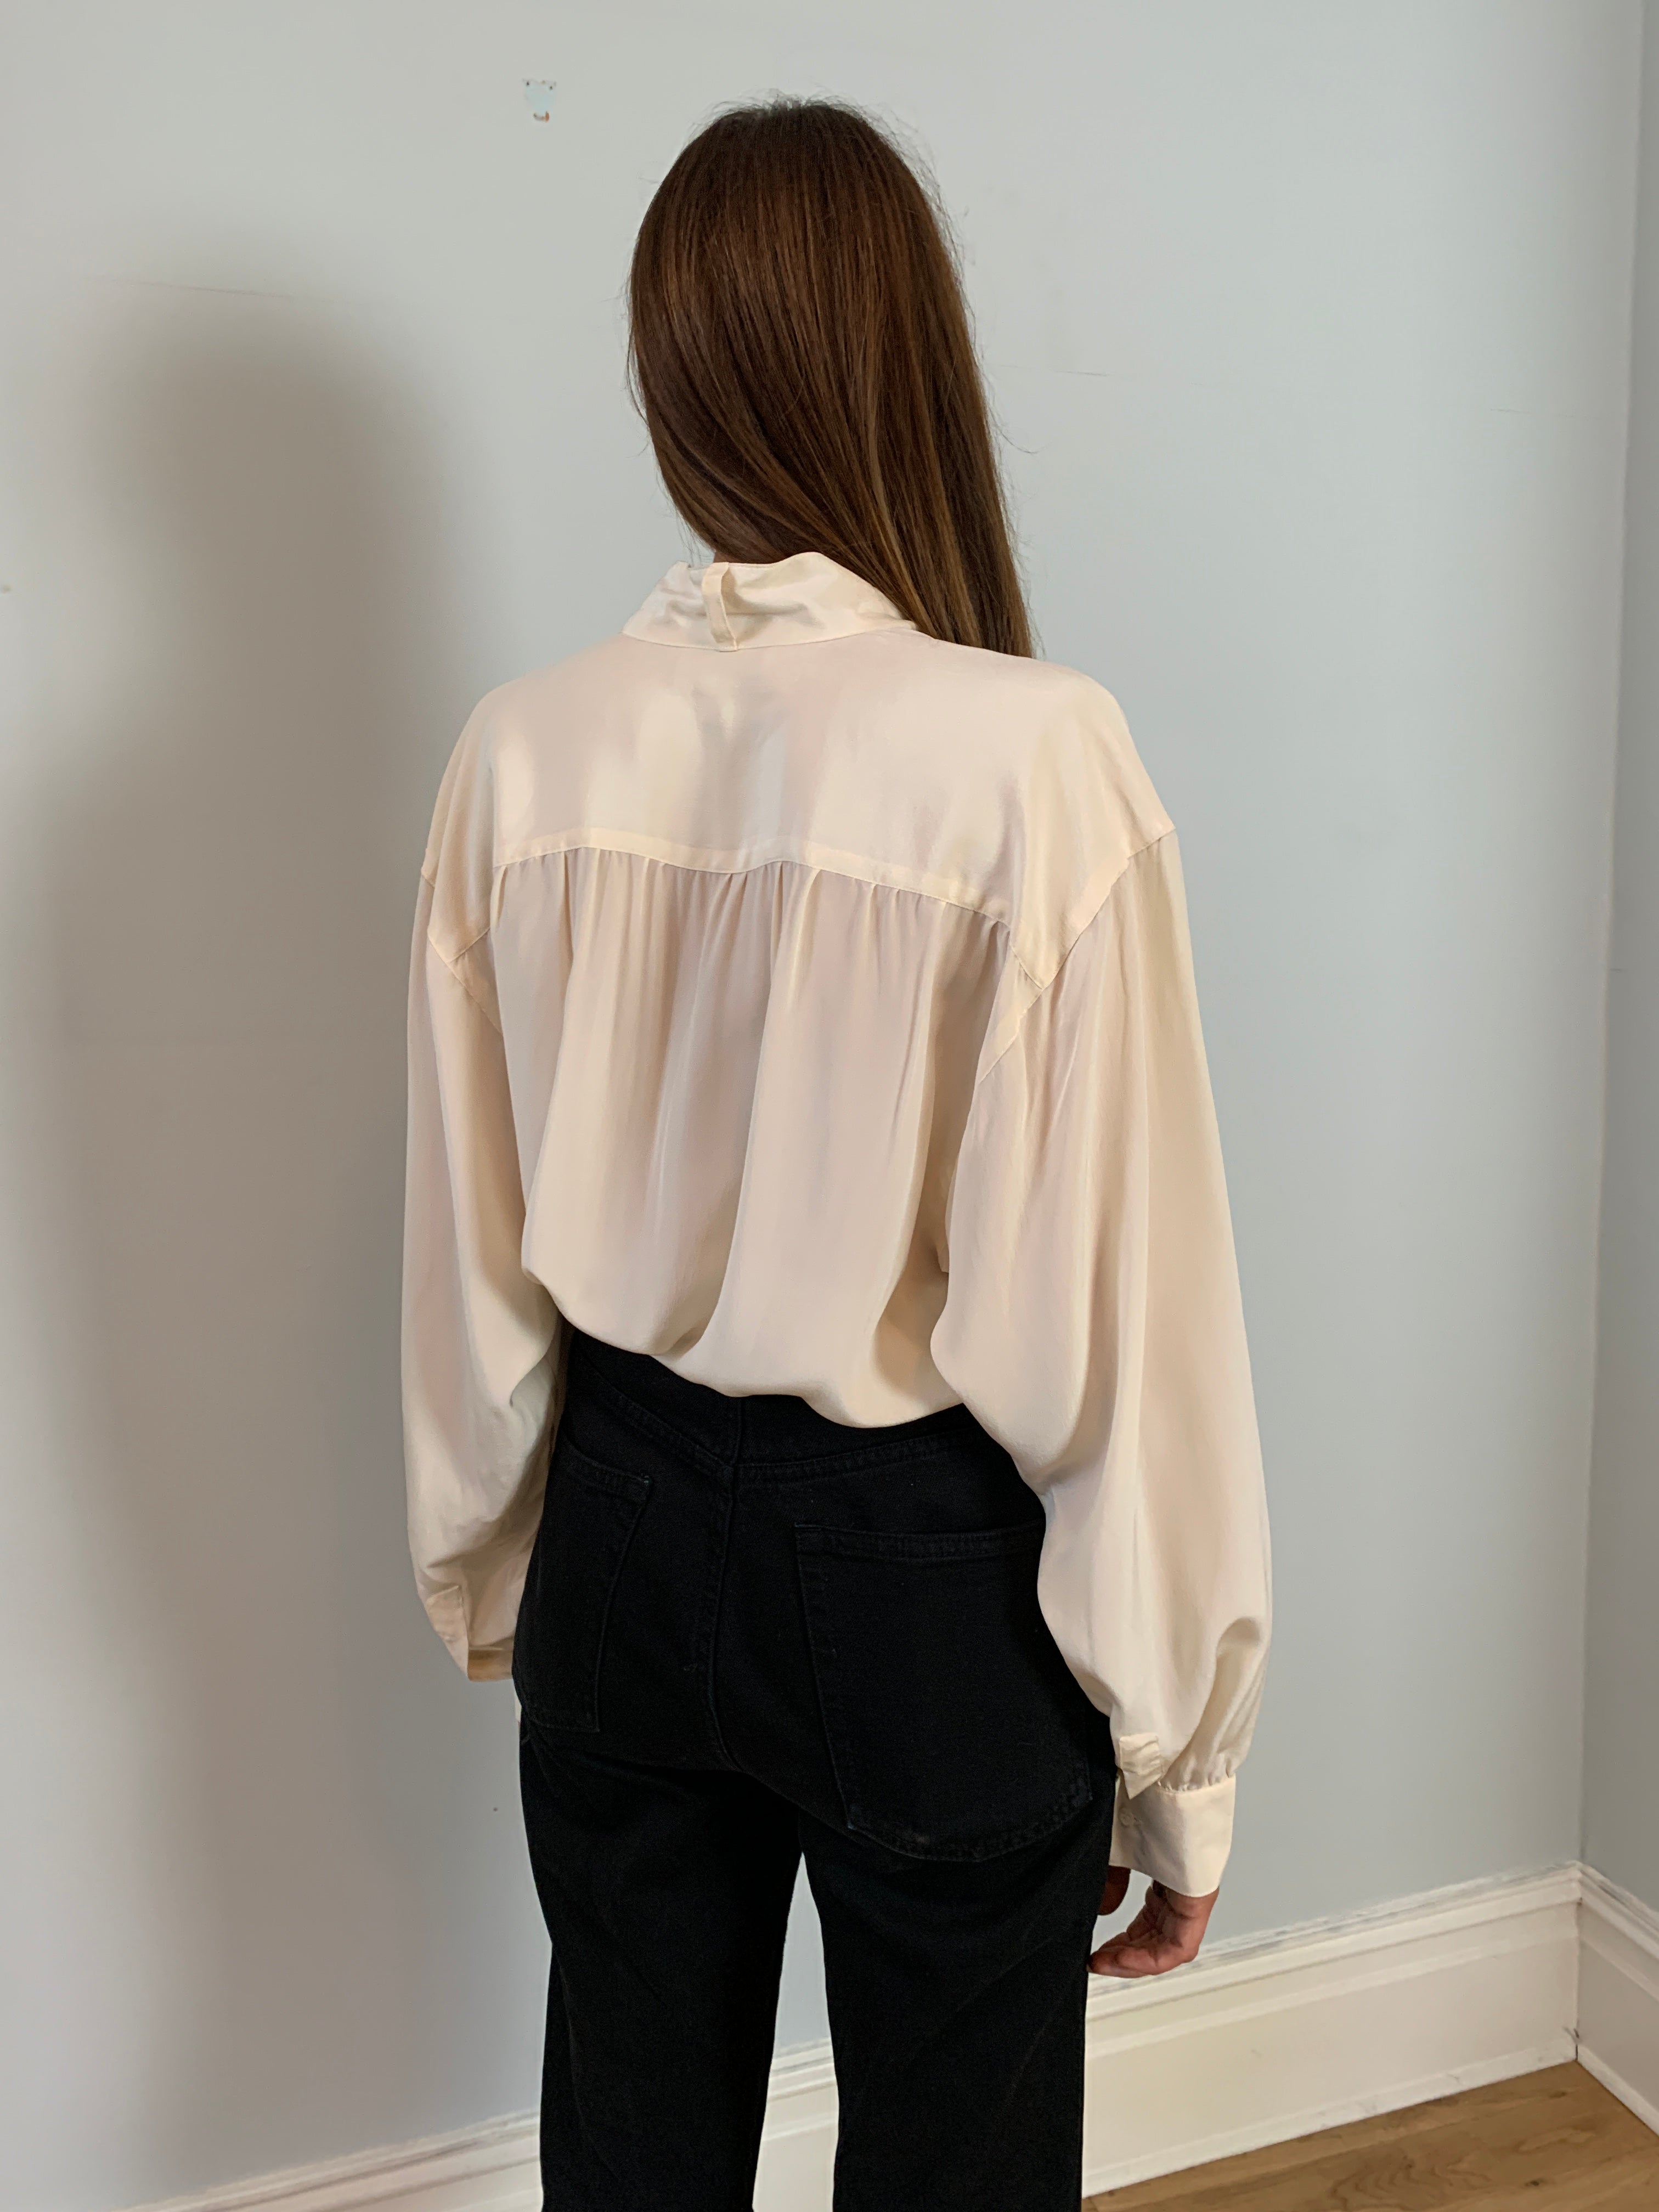 Vintage silk 1990s high neck blouse in ivory